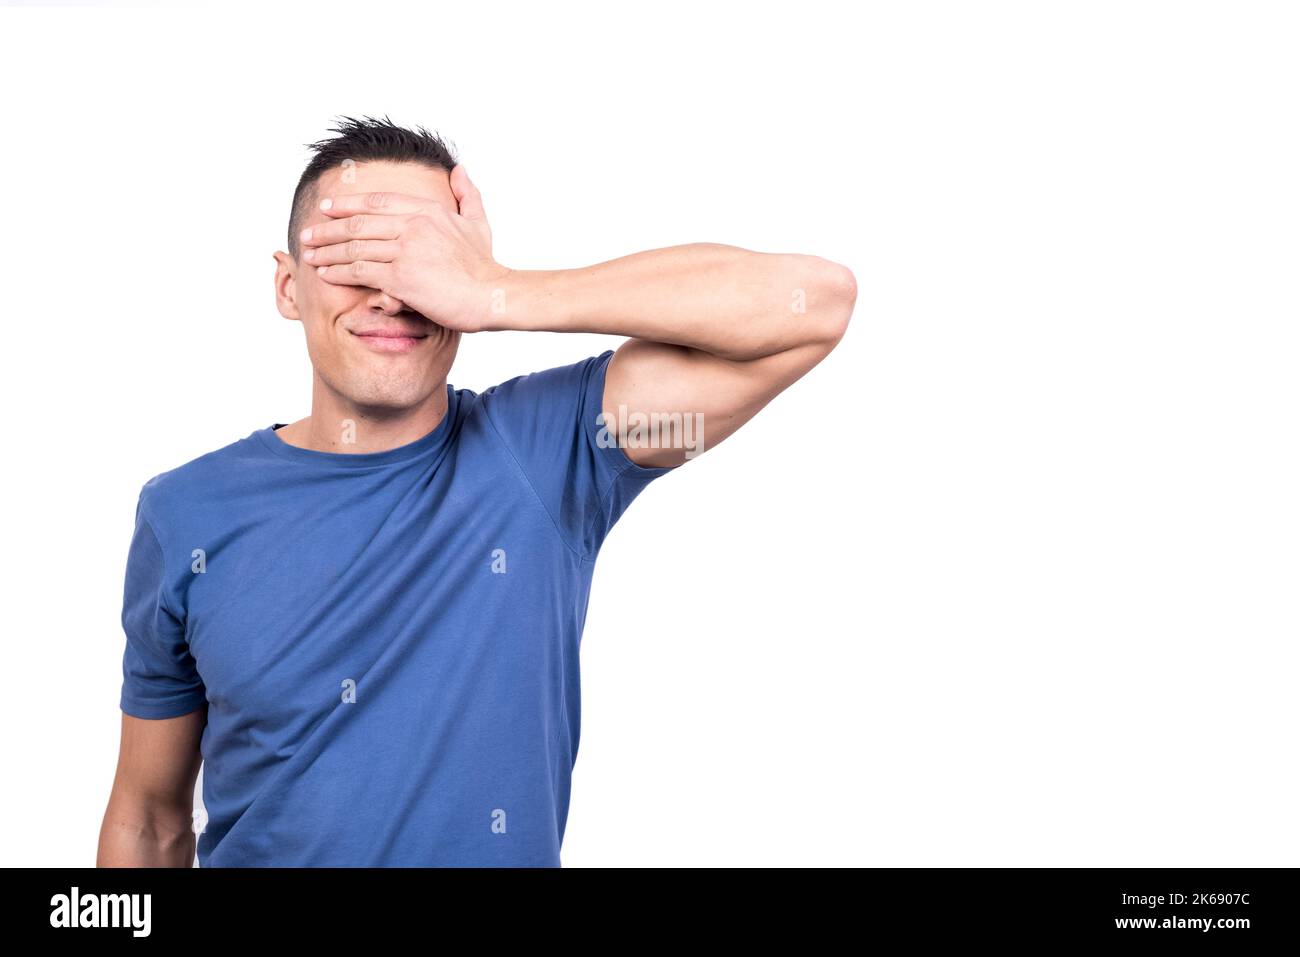 Man covering his eyes with his hand Stock Photo